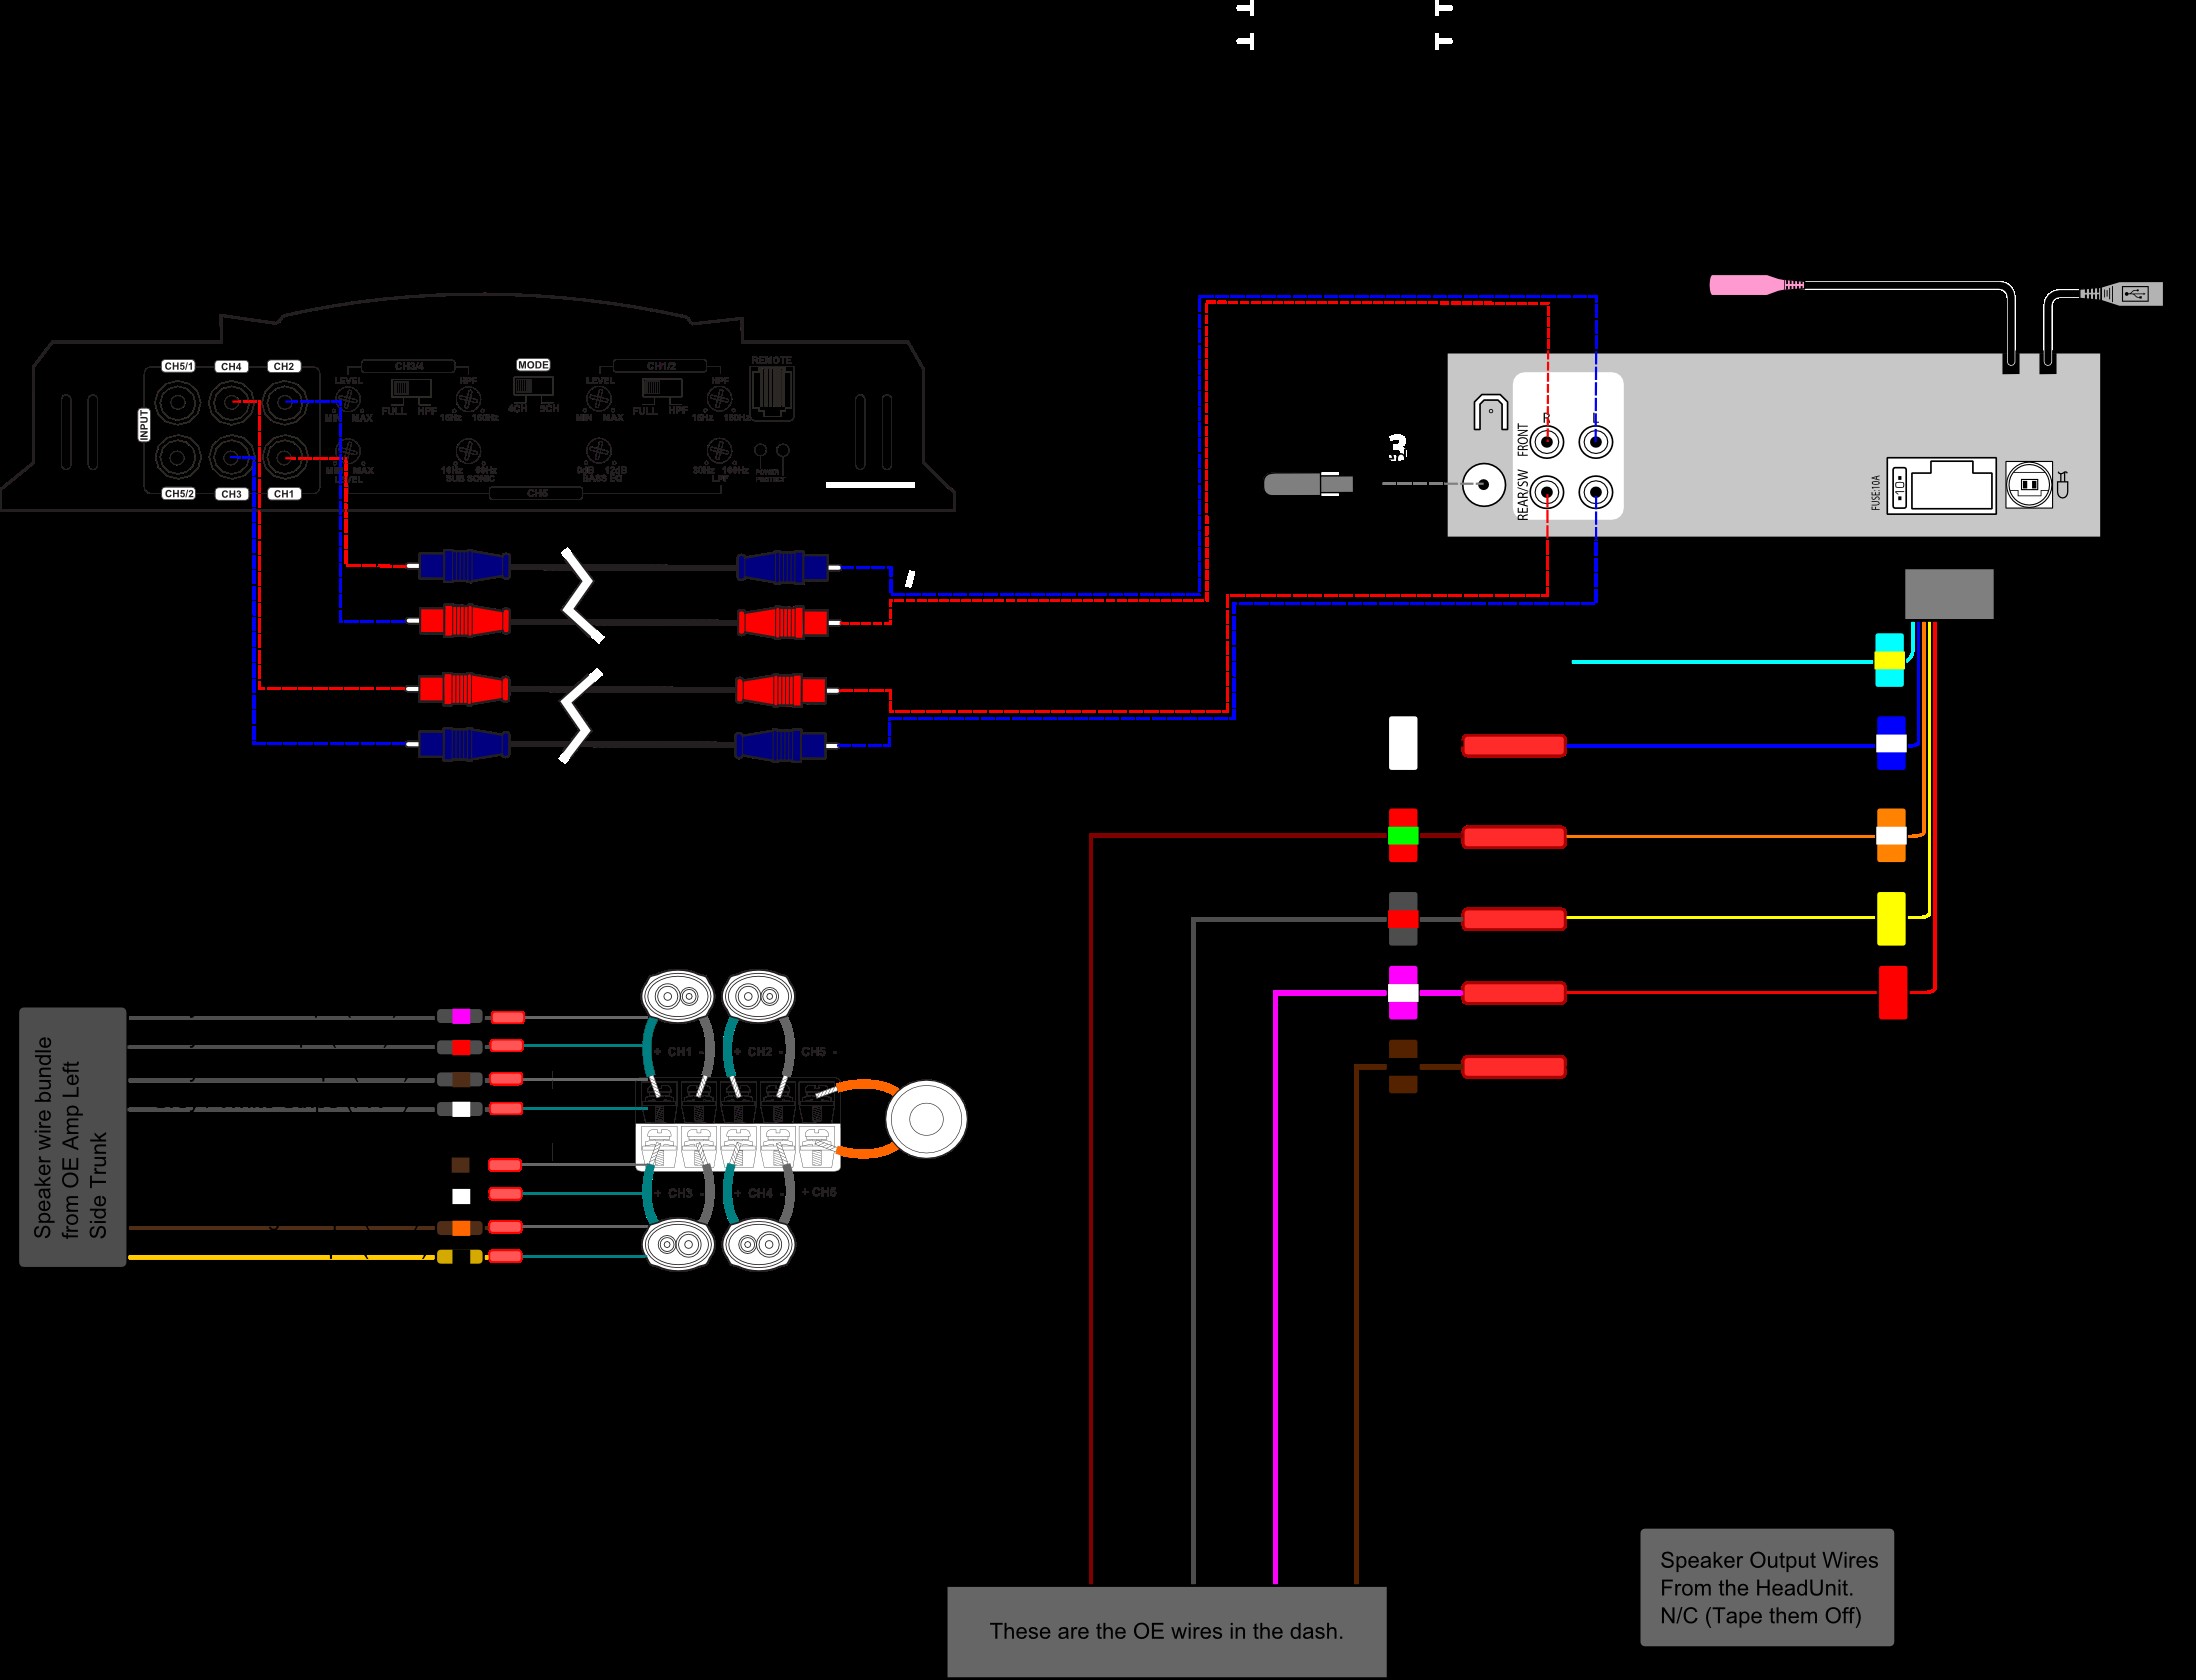 Wiring Diagram for Car Audio System Car Audio Wiring Diagrams Jvc Stereo Diagram Color On within Auto